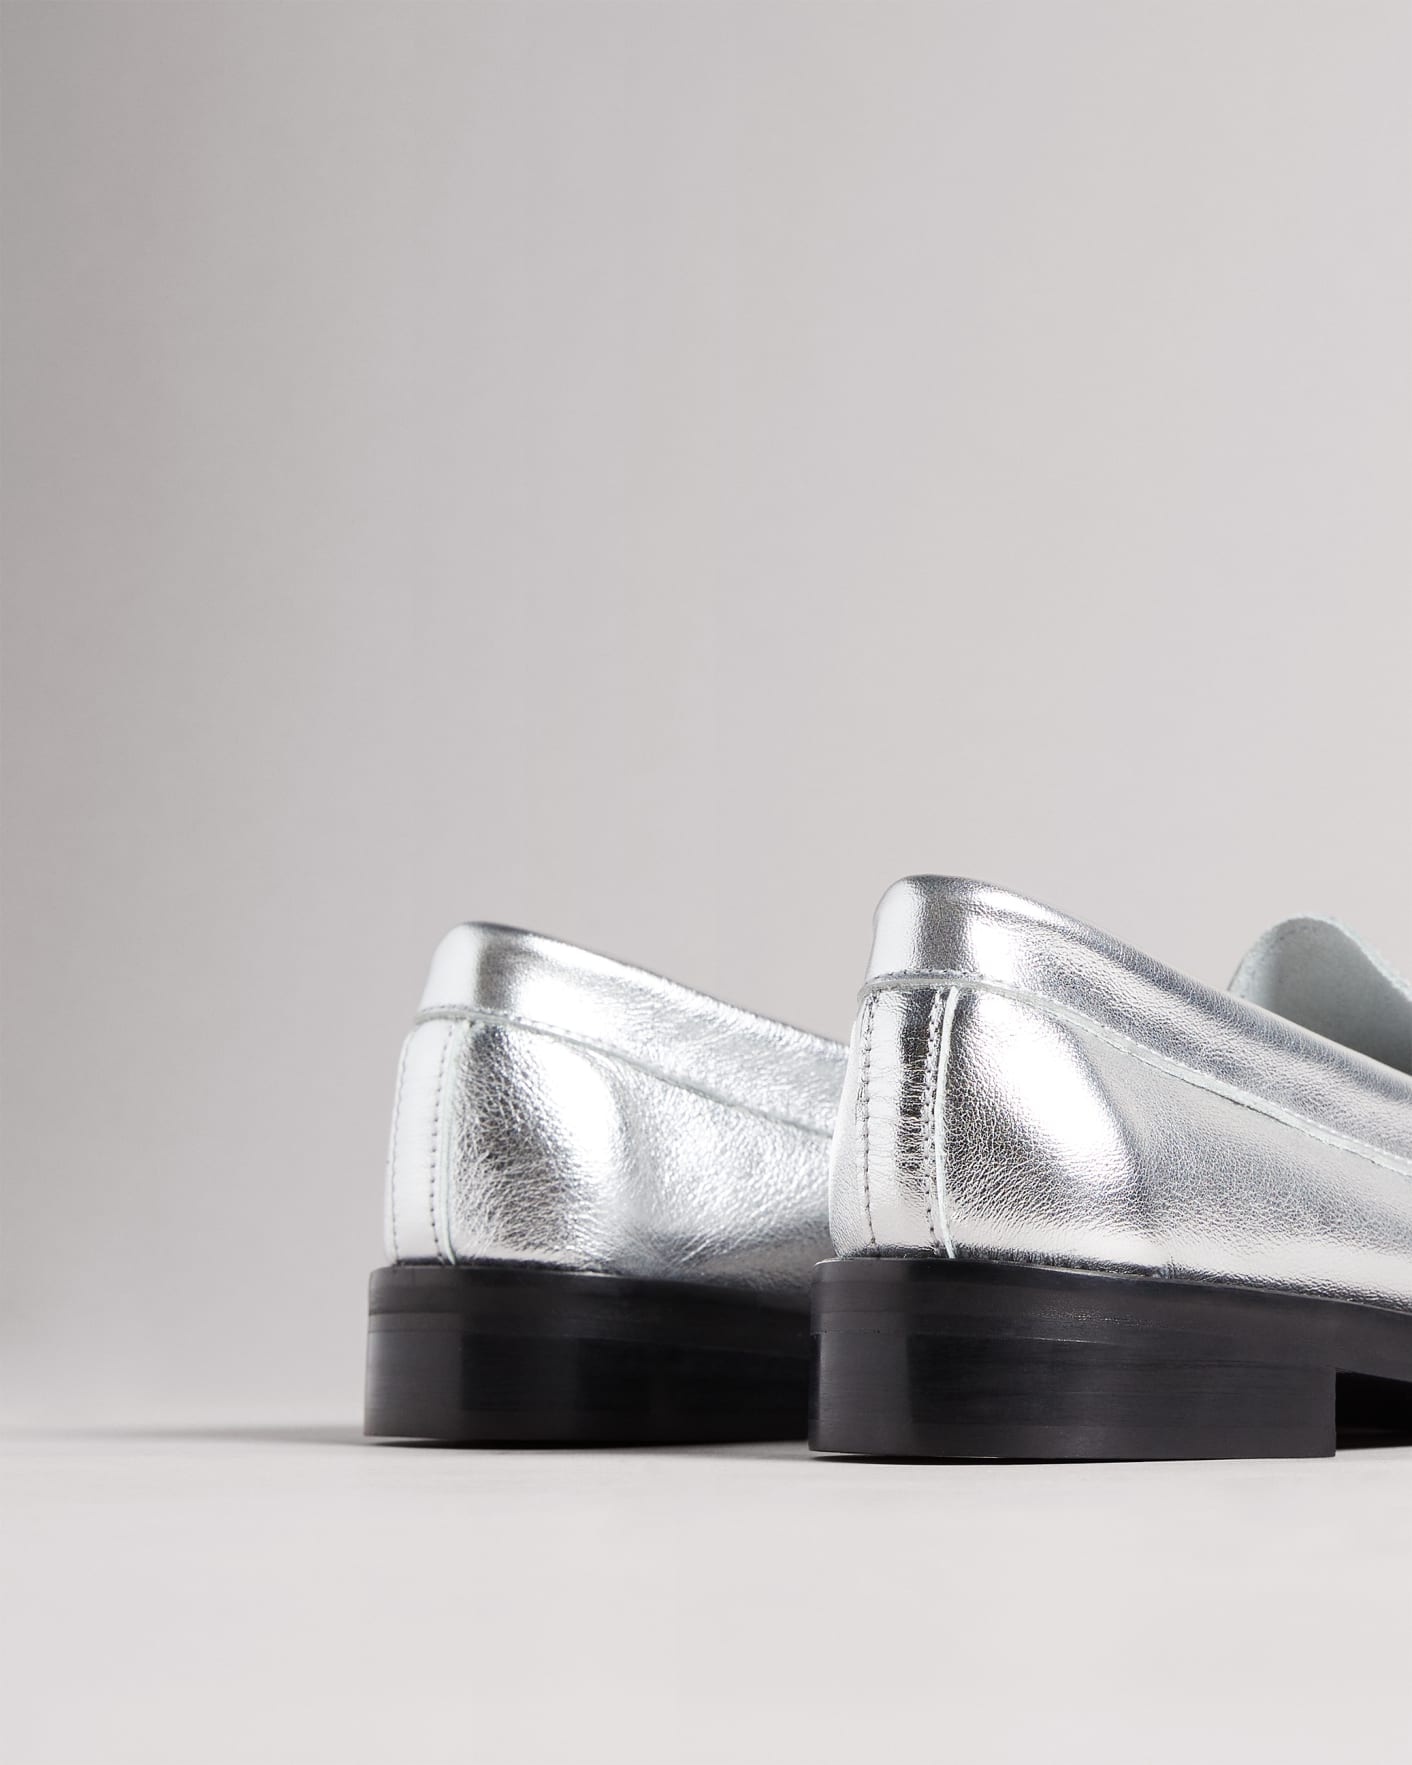 Silver Metallic Leather Loafer Ted Baker